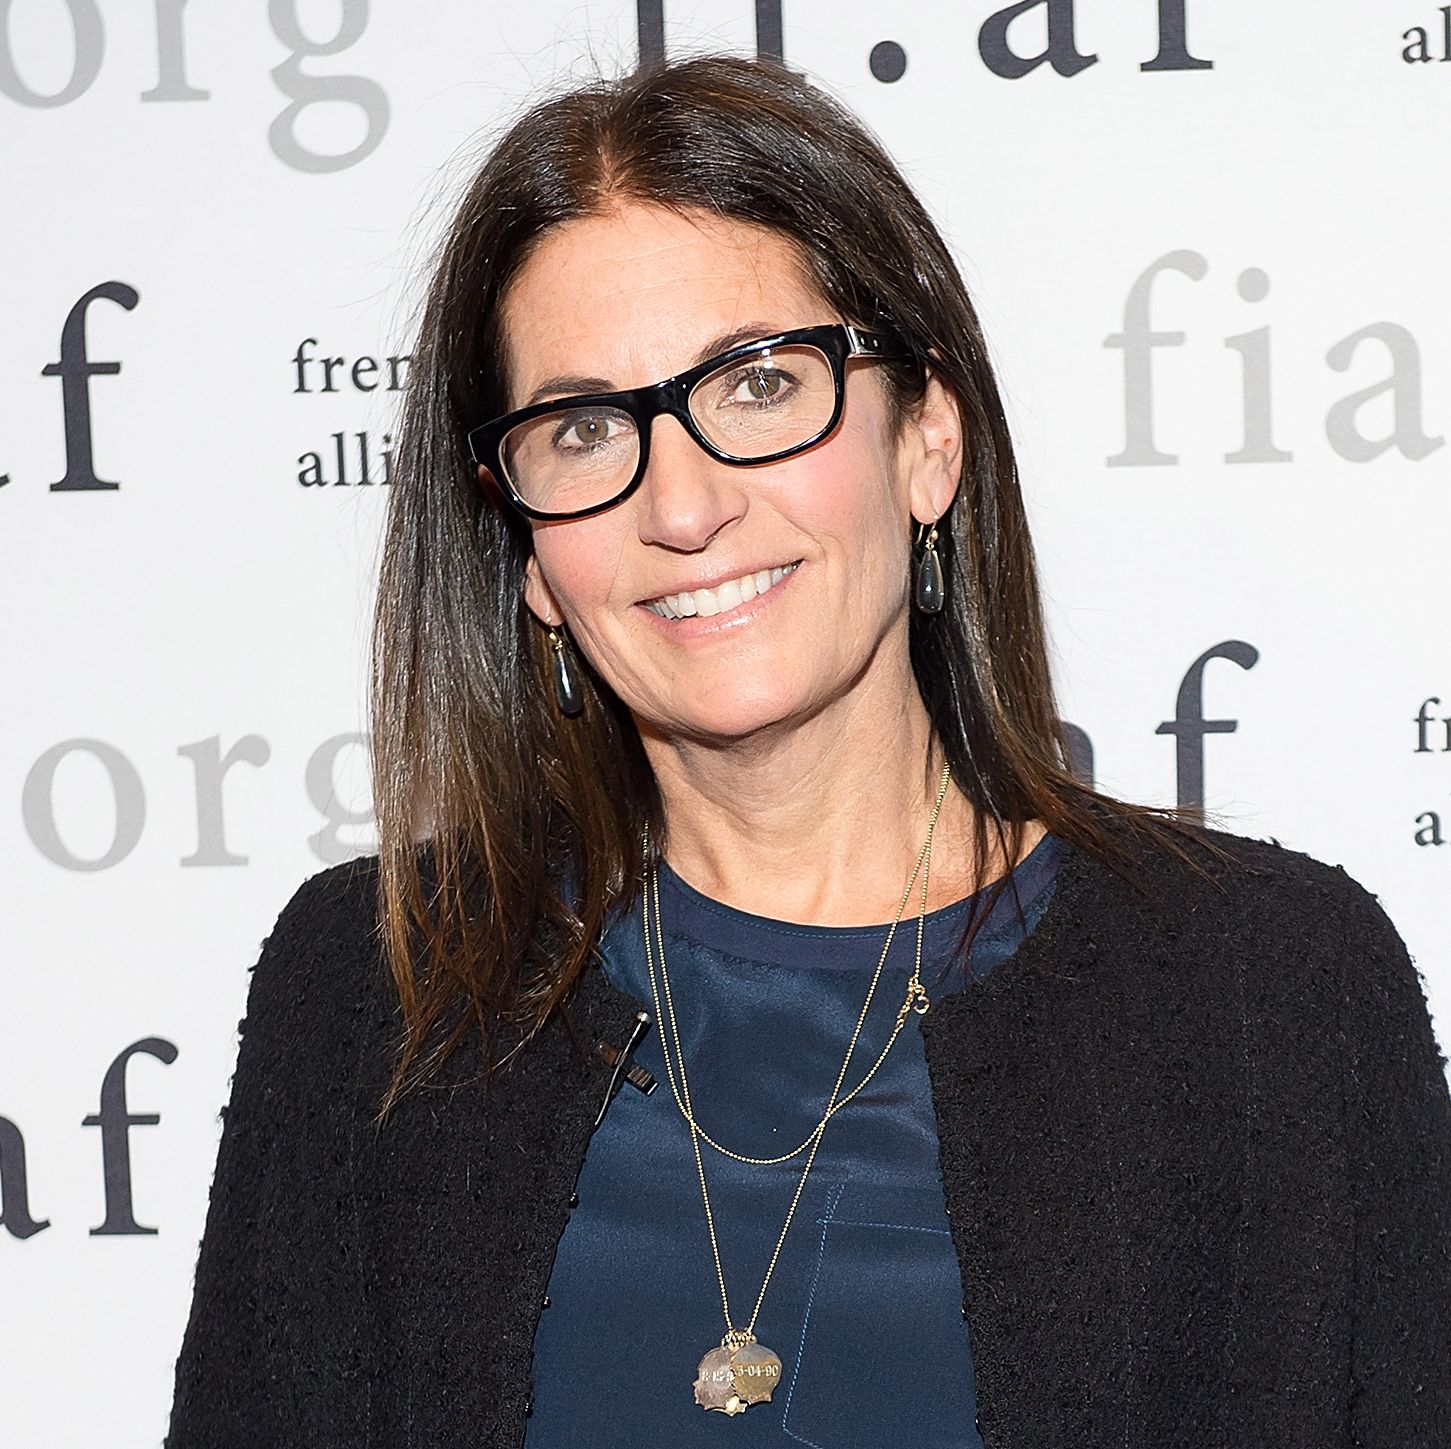 Bobbi Brown Shares Simple Makeup Tips for Rosacea That Make a 'Big Difference'